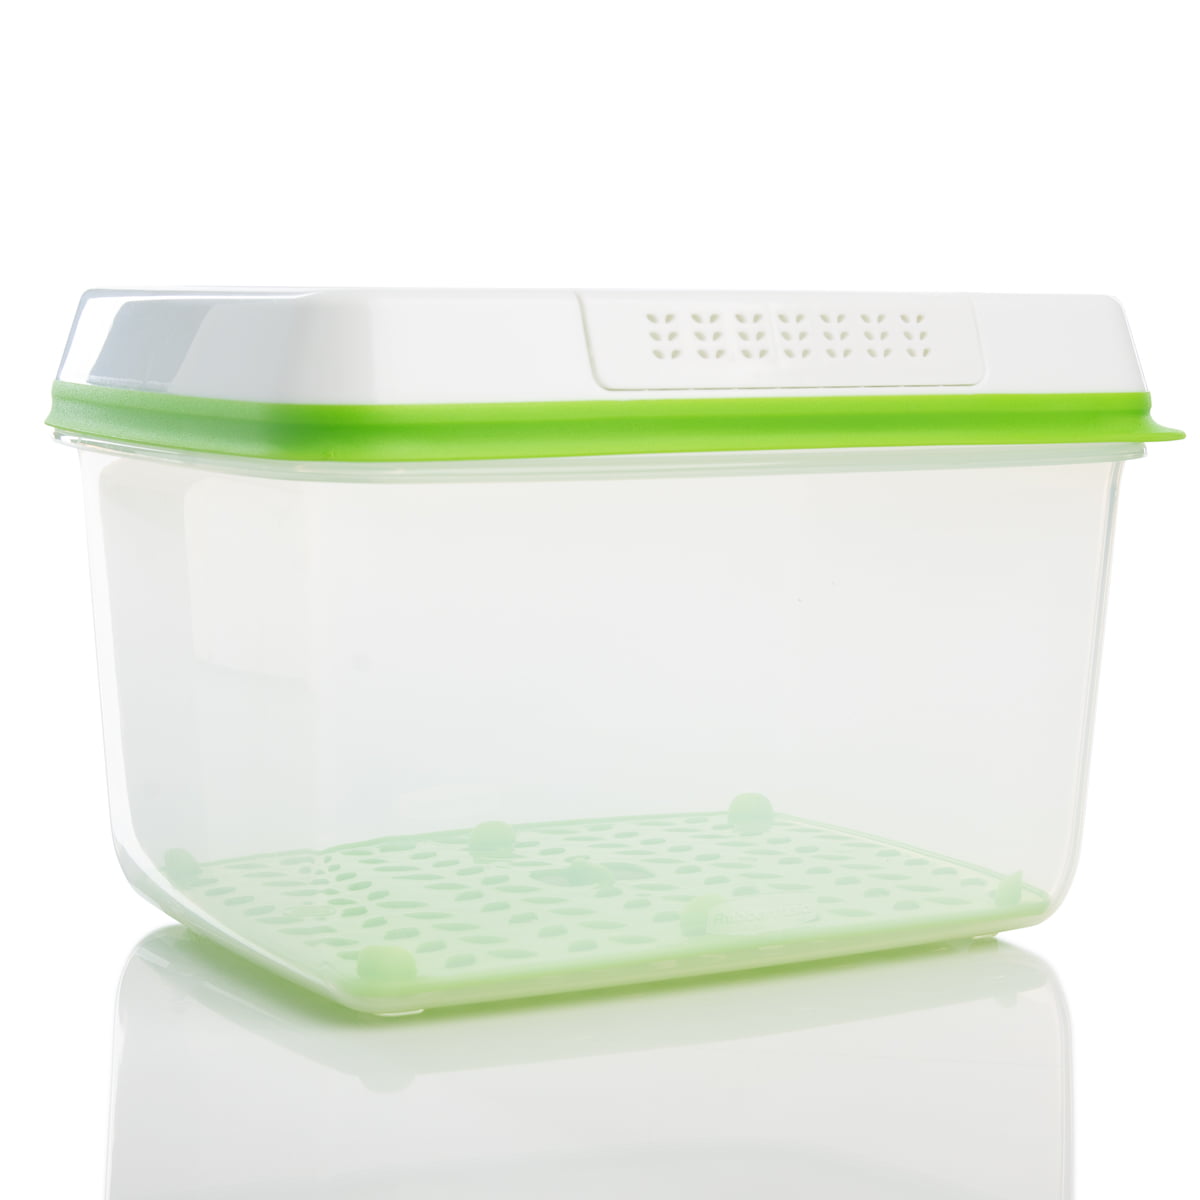 Rubbermaid Fresh Works Produce Saver Large Rectangle Food Storage Container  - Clear/Green, 17.3 c - Gerbes Super Markets